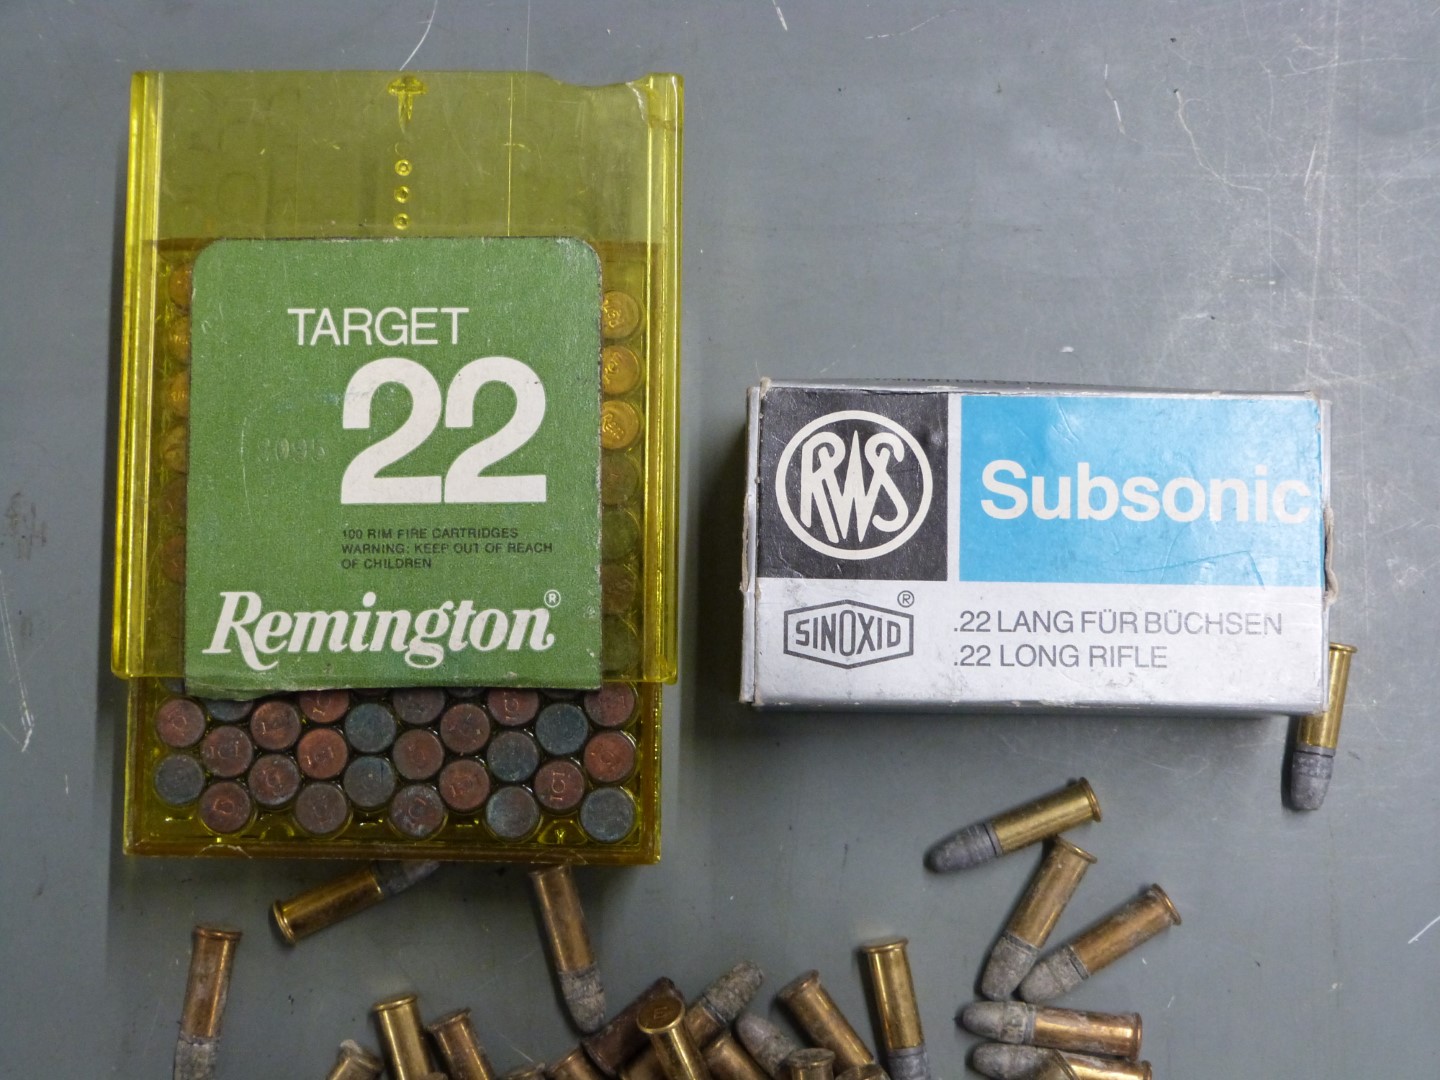 One-hundred-and-seventy-four .22 rifle cartridges including Remington and RWS Subsonic, some in - Image 2 of 2